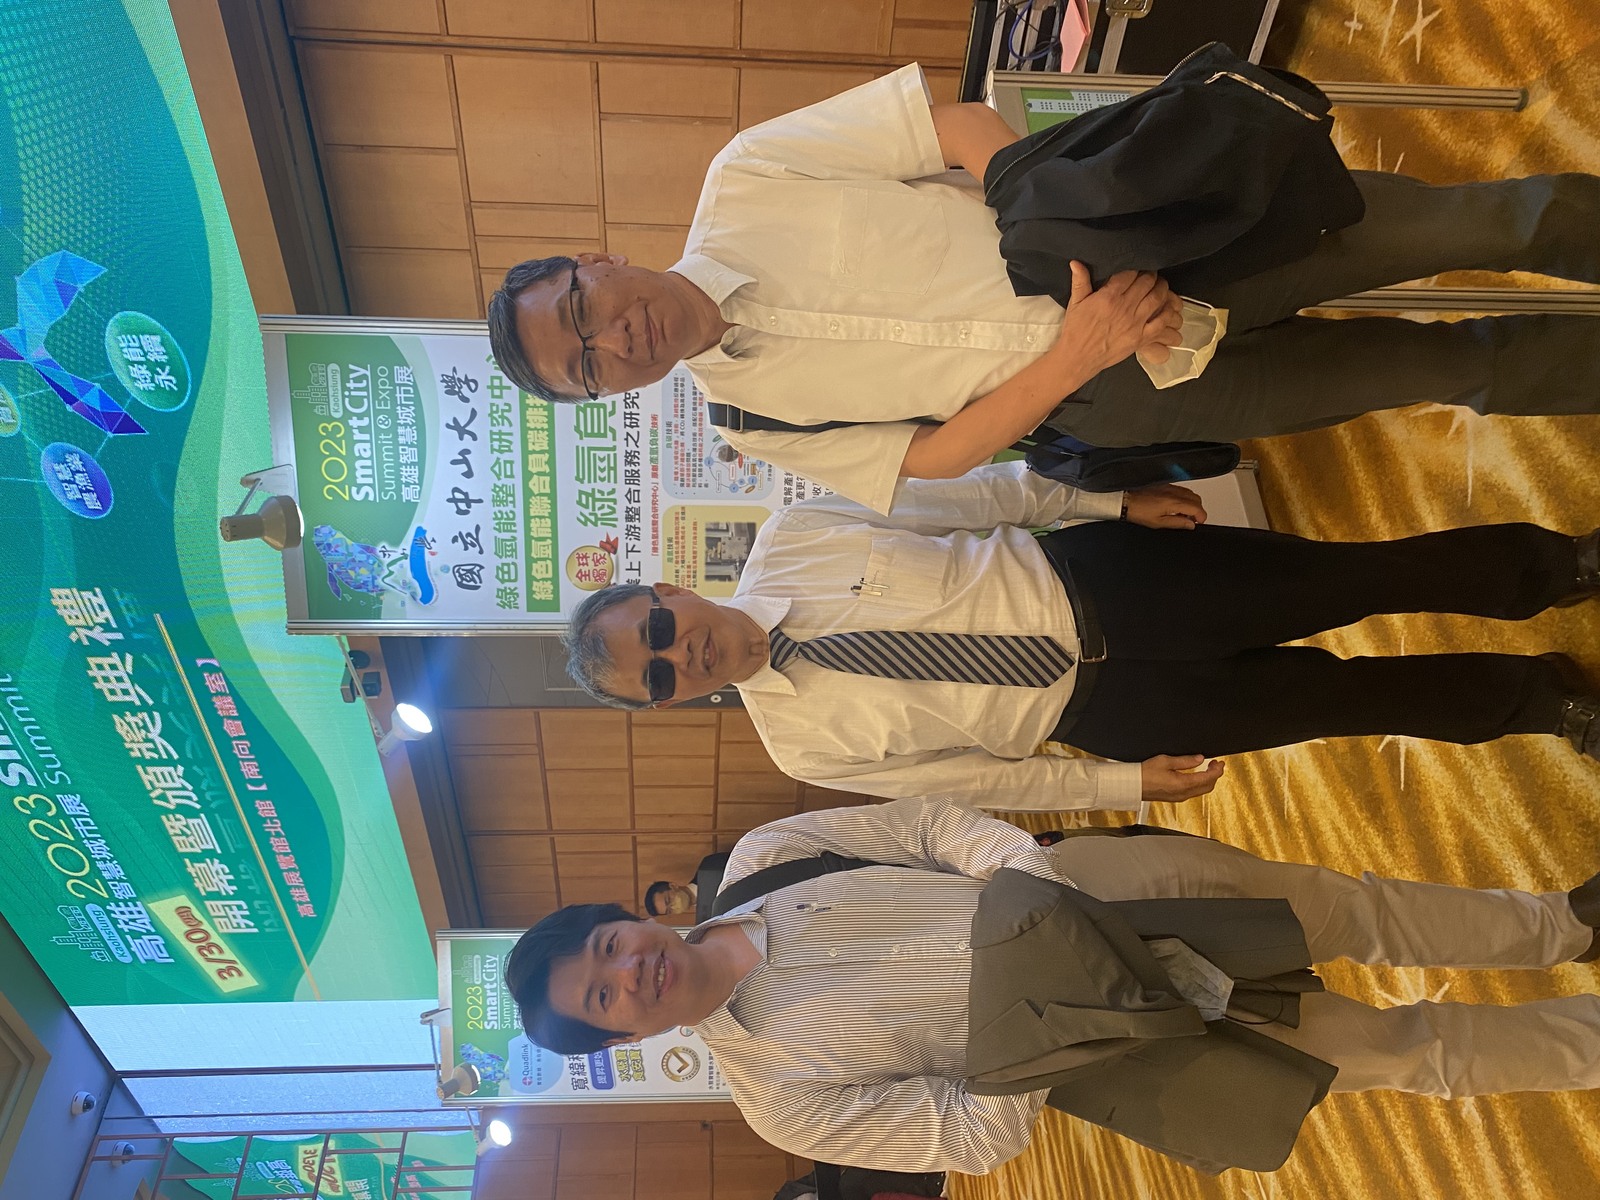 (From the left of the photo) Director of the Green Hydrogen Research Center Chun-Hu Chen, President of NSYSU Ying-Yao Cheng, and Vice President of OGIACA at NSYSU Ann-Kuo Chu